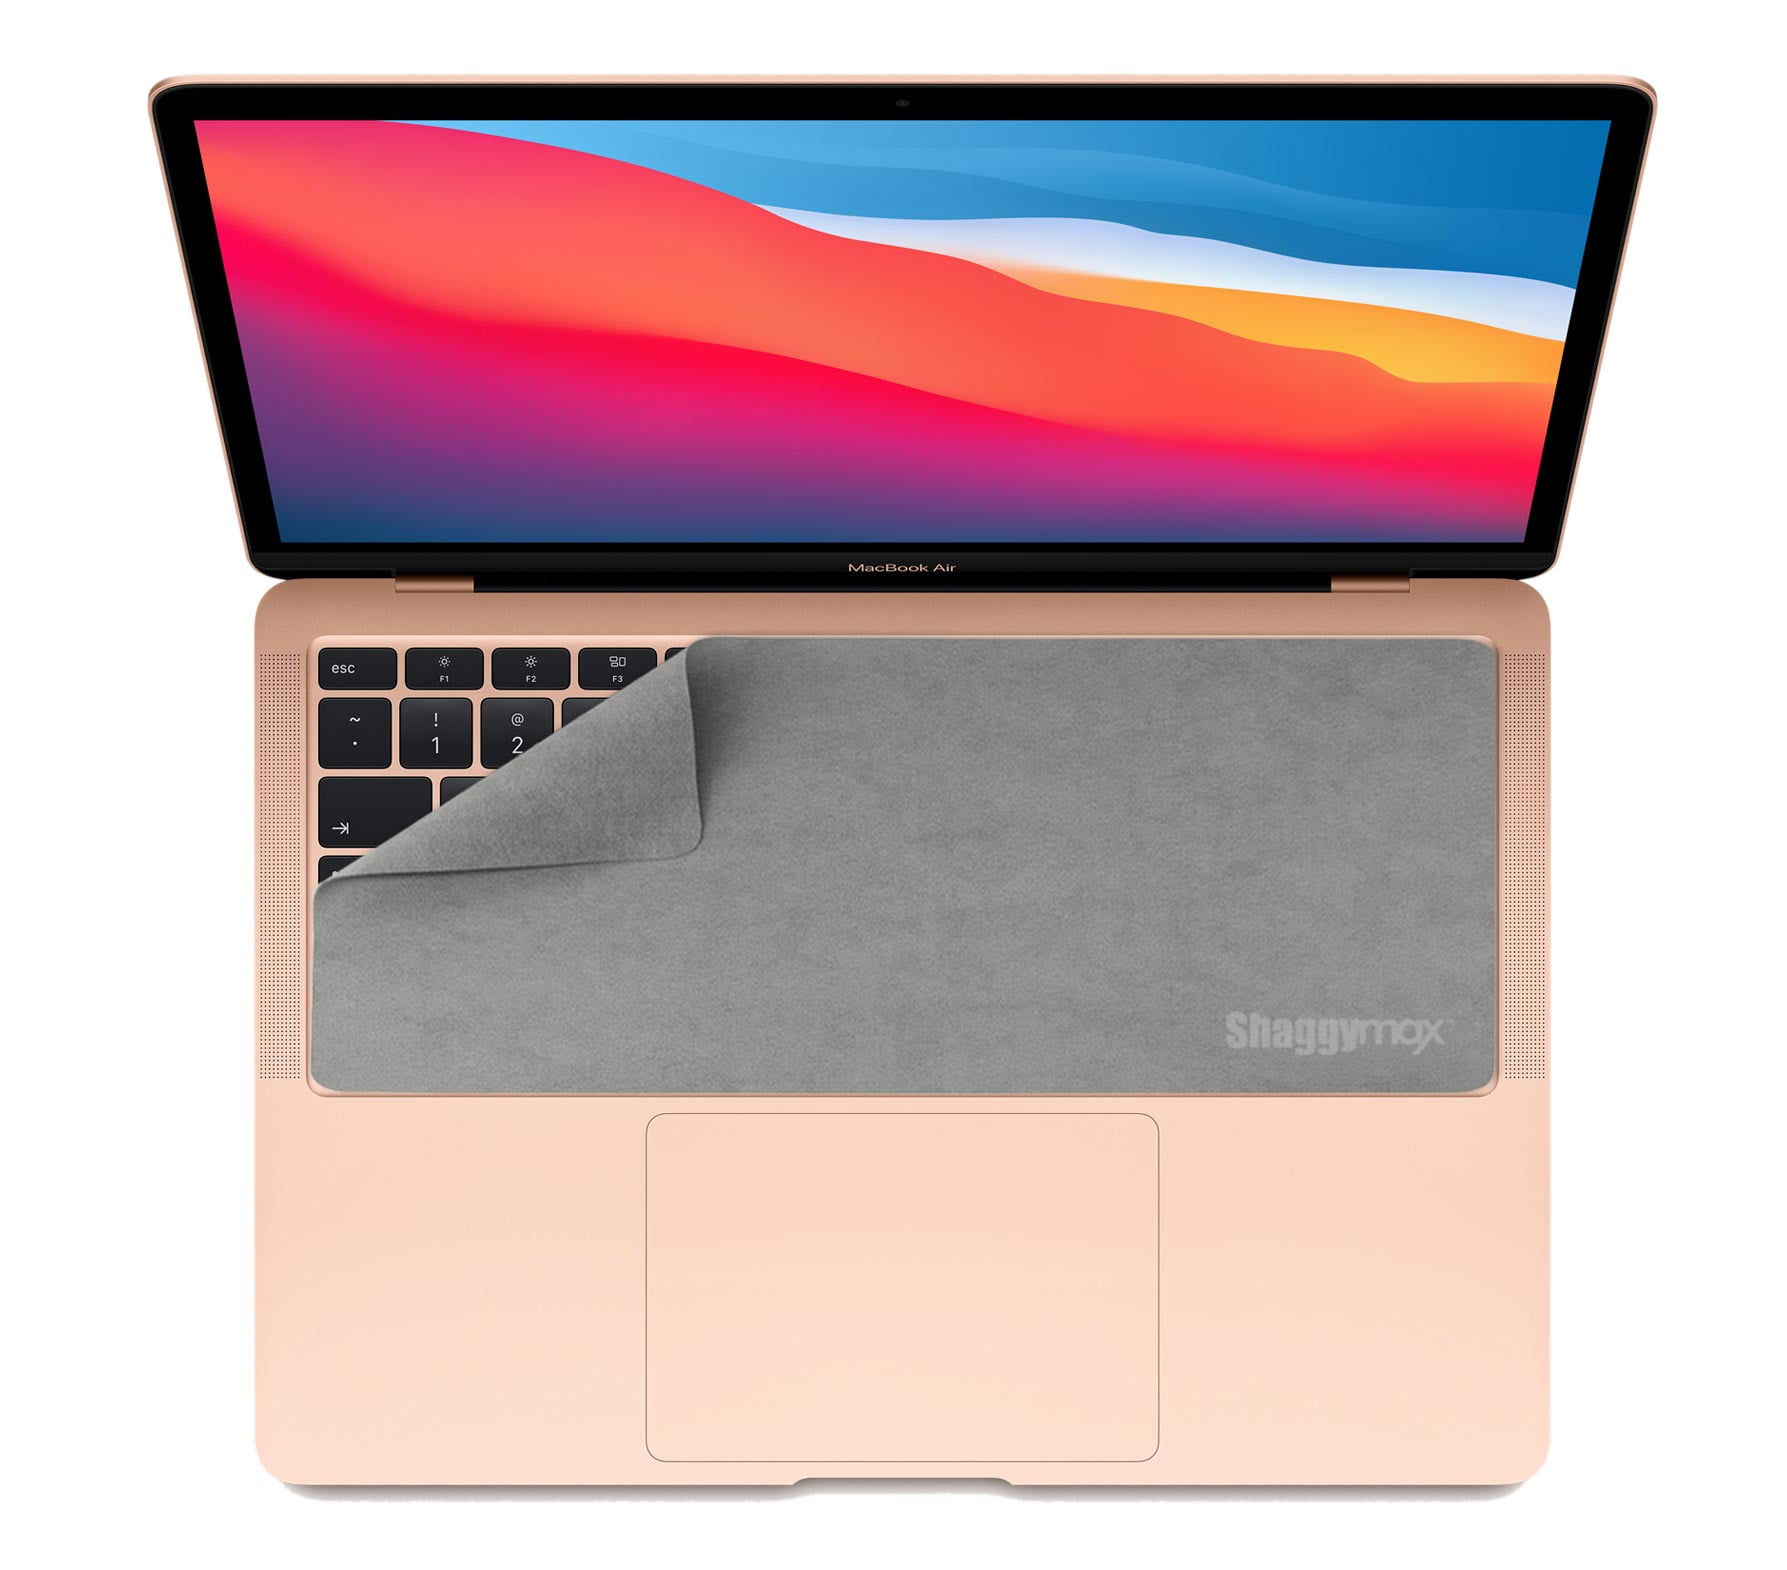 MacBook Pro Case Suitable Paper Fabric Packaging Simple MacBook Air 13 A1932 Plastic Case Keyboard Cover & Screen Protector & Keyboard Clea Touch ID